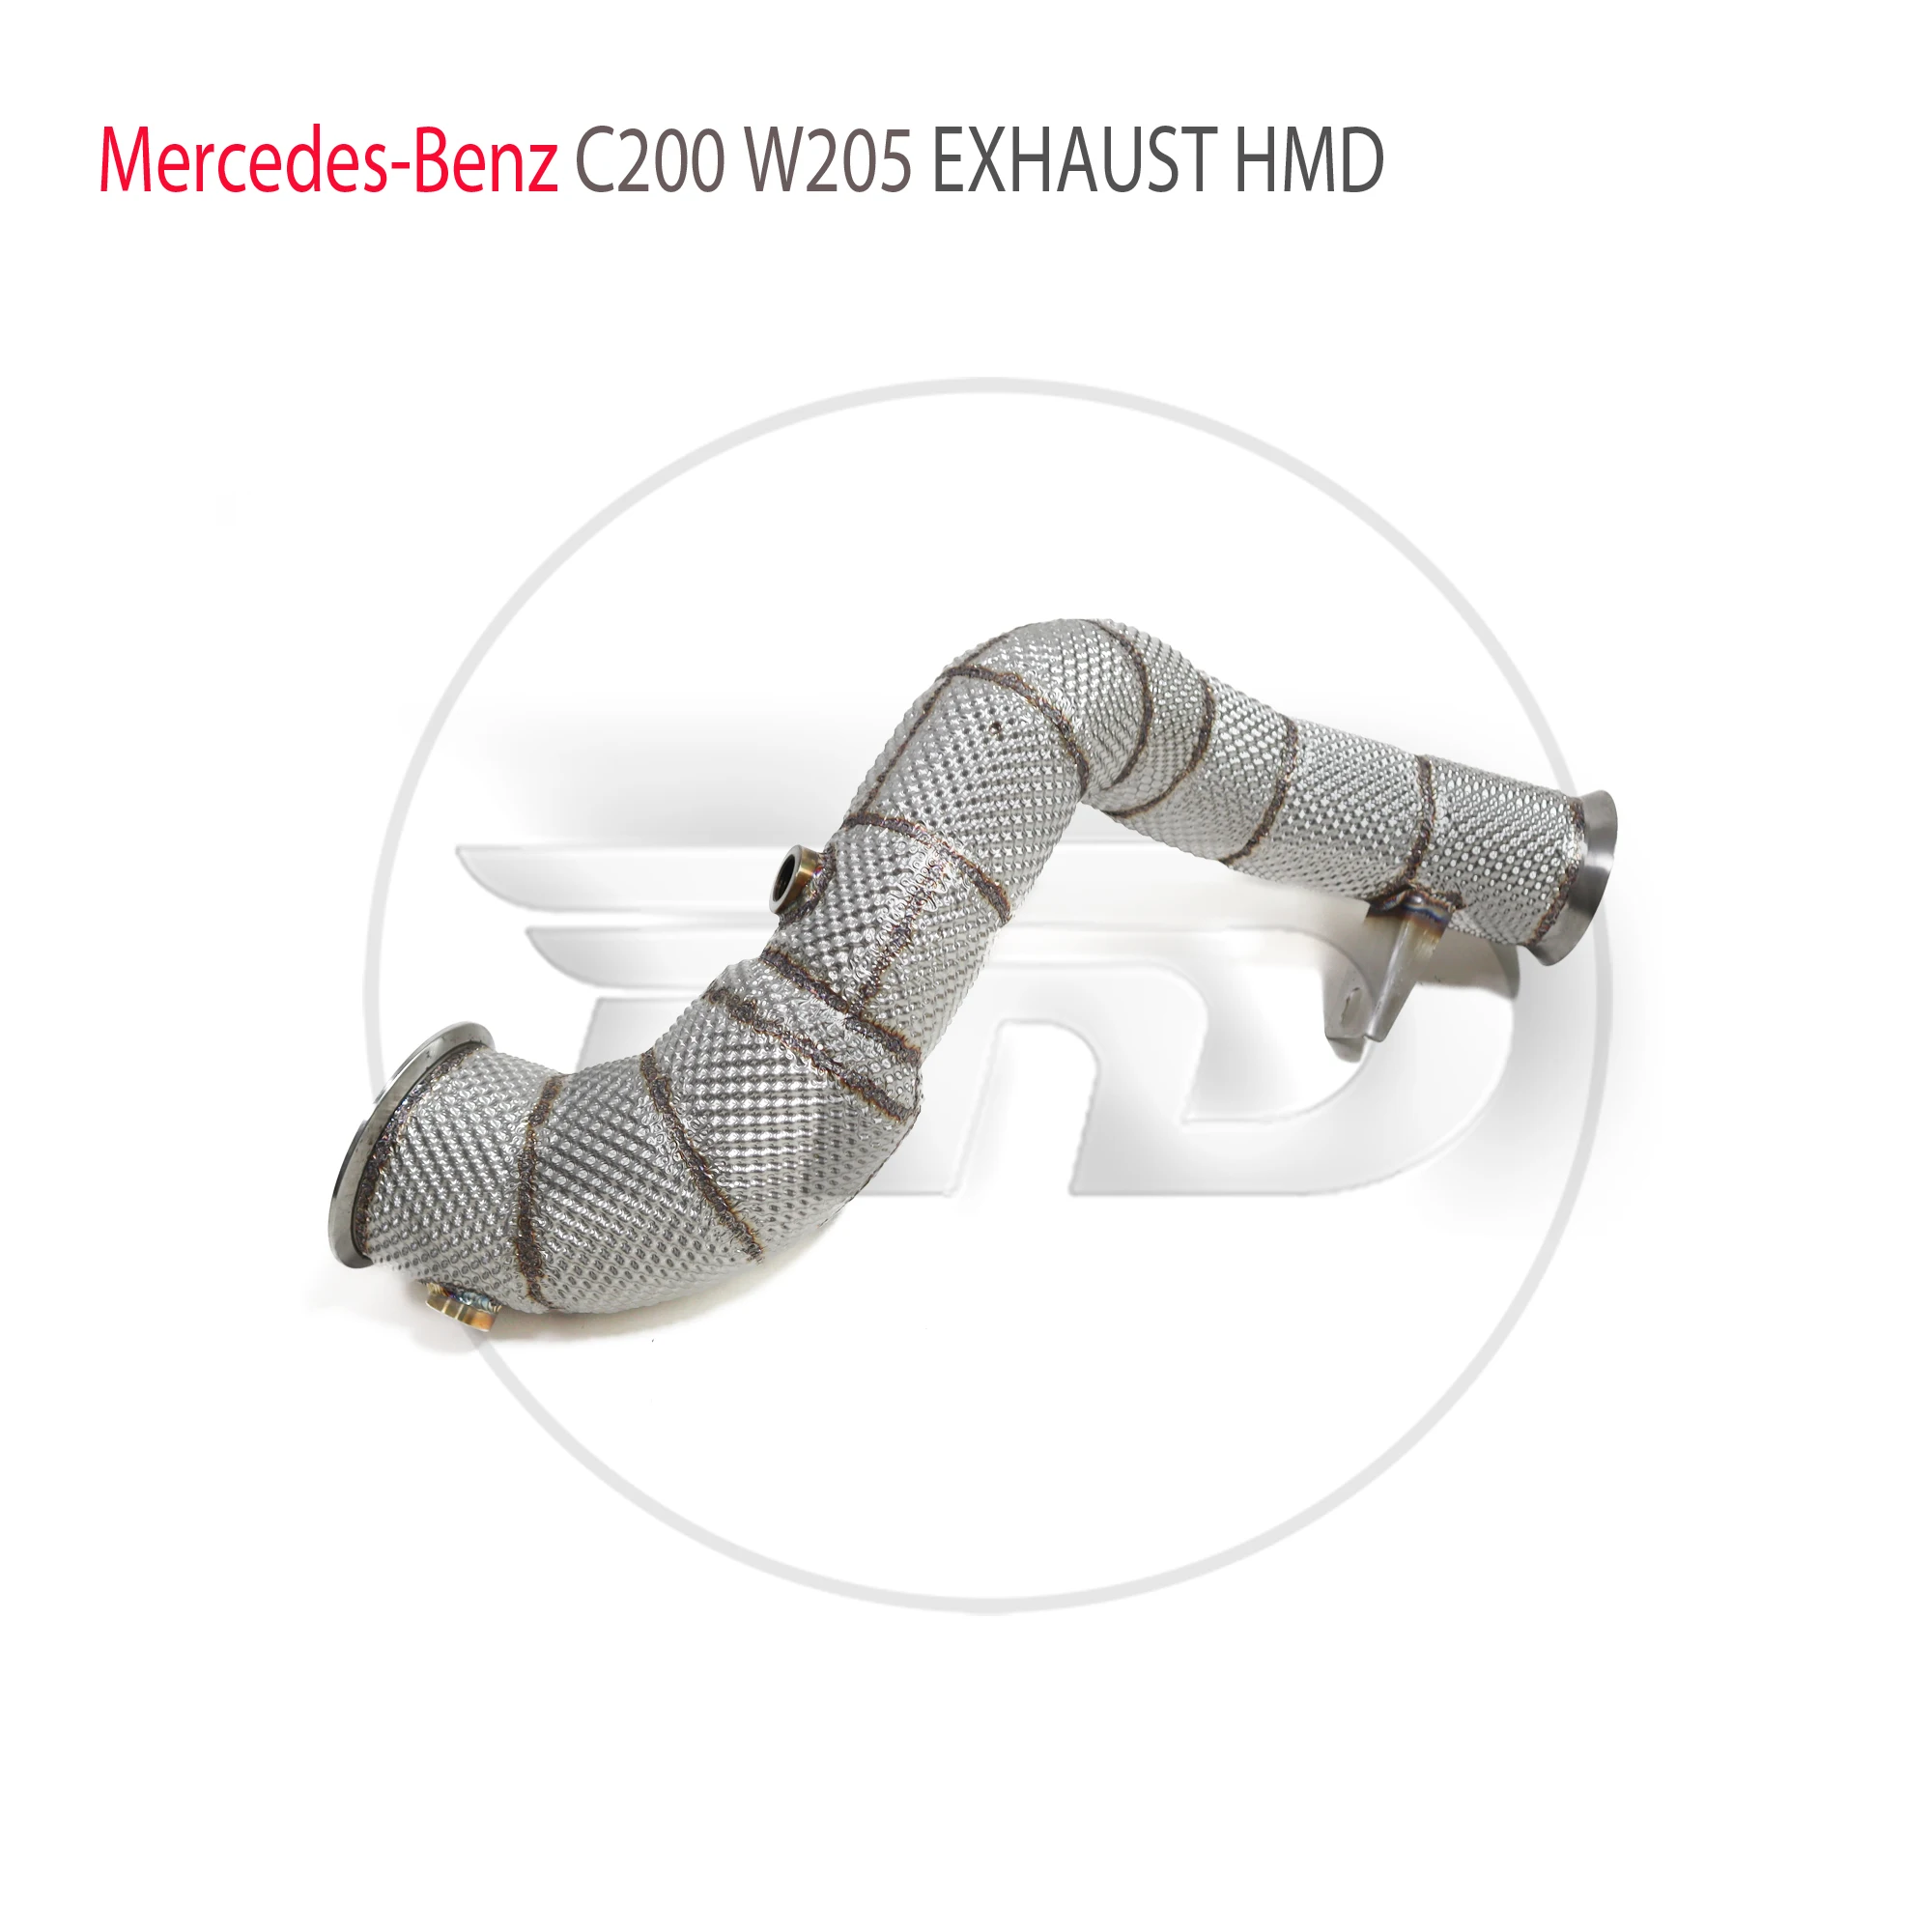 

HMD Exhaust System High Flow Performance Downpipe for Mercedes Benz S205 C205 C200 M274 M264 1.5T 2.0T Right-hand Drive Car